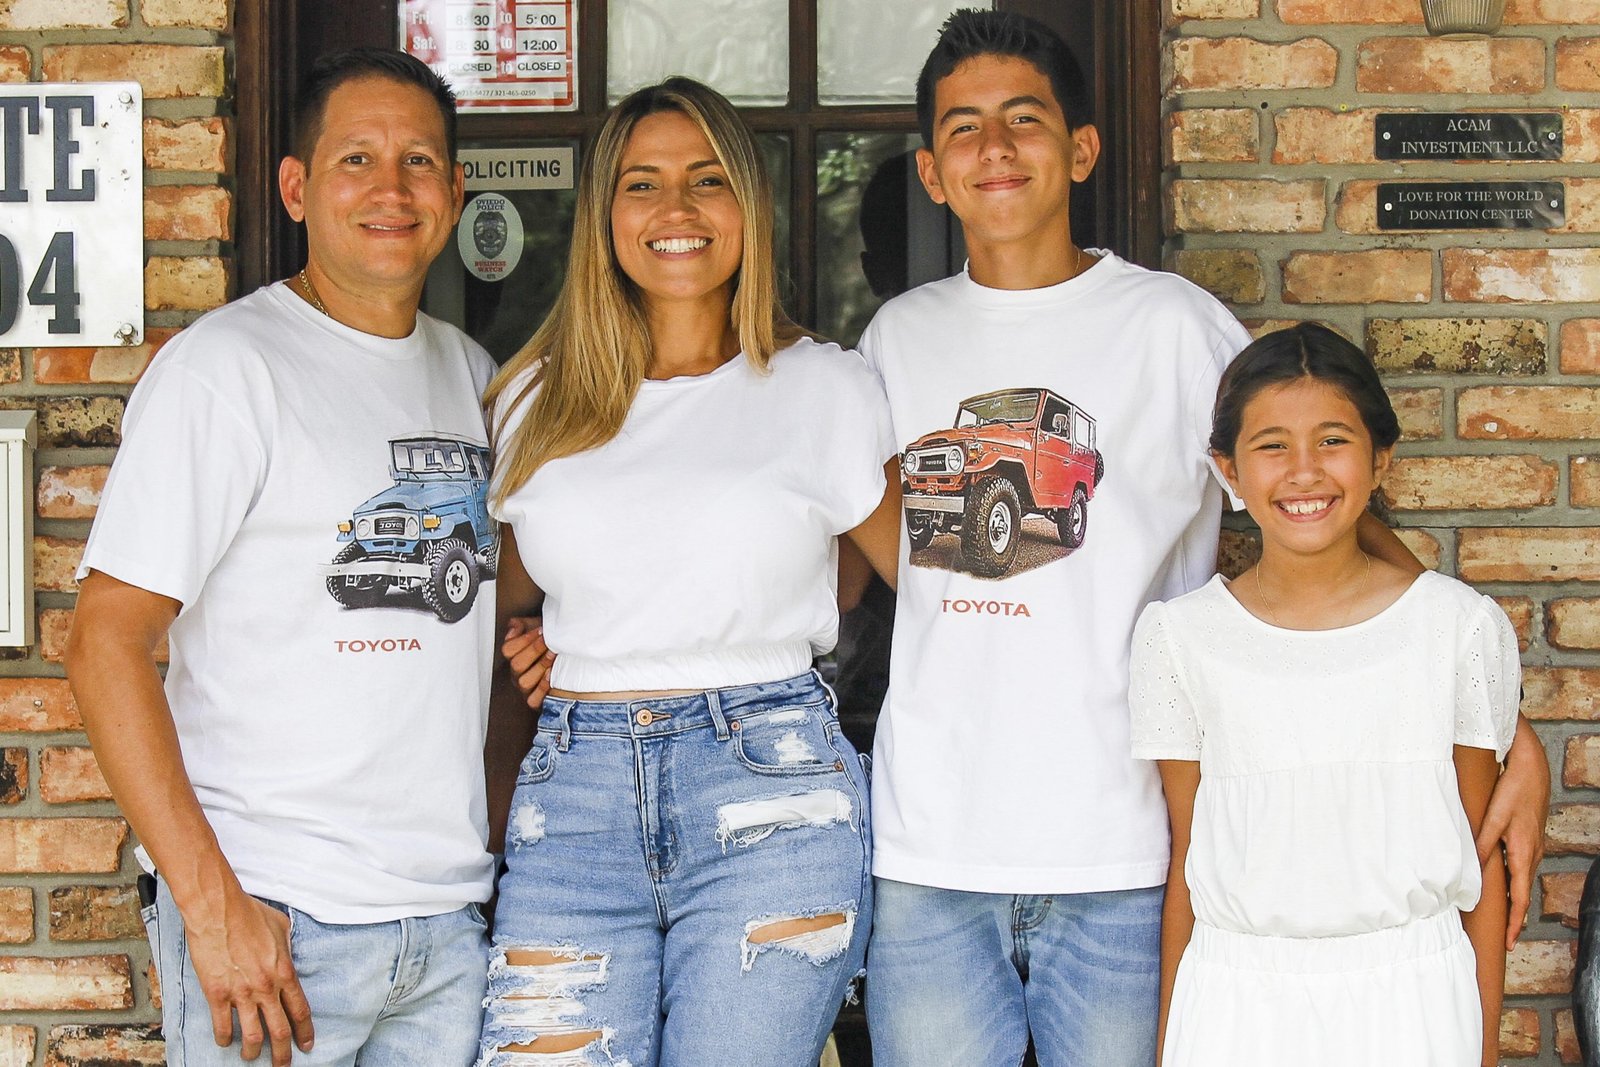 Florida yard is a passionate family business who loves trucks and parts business.